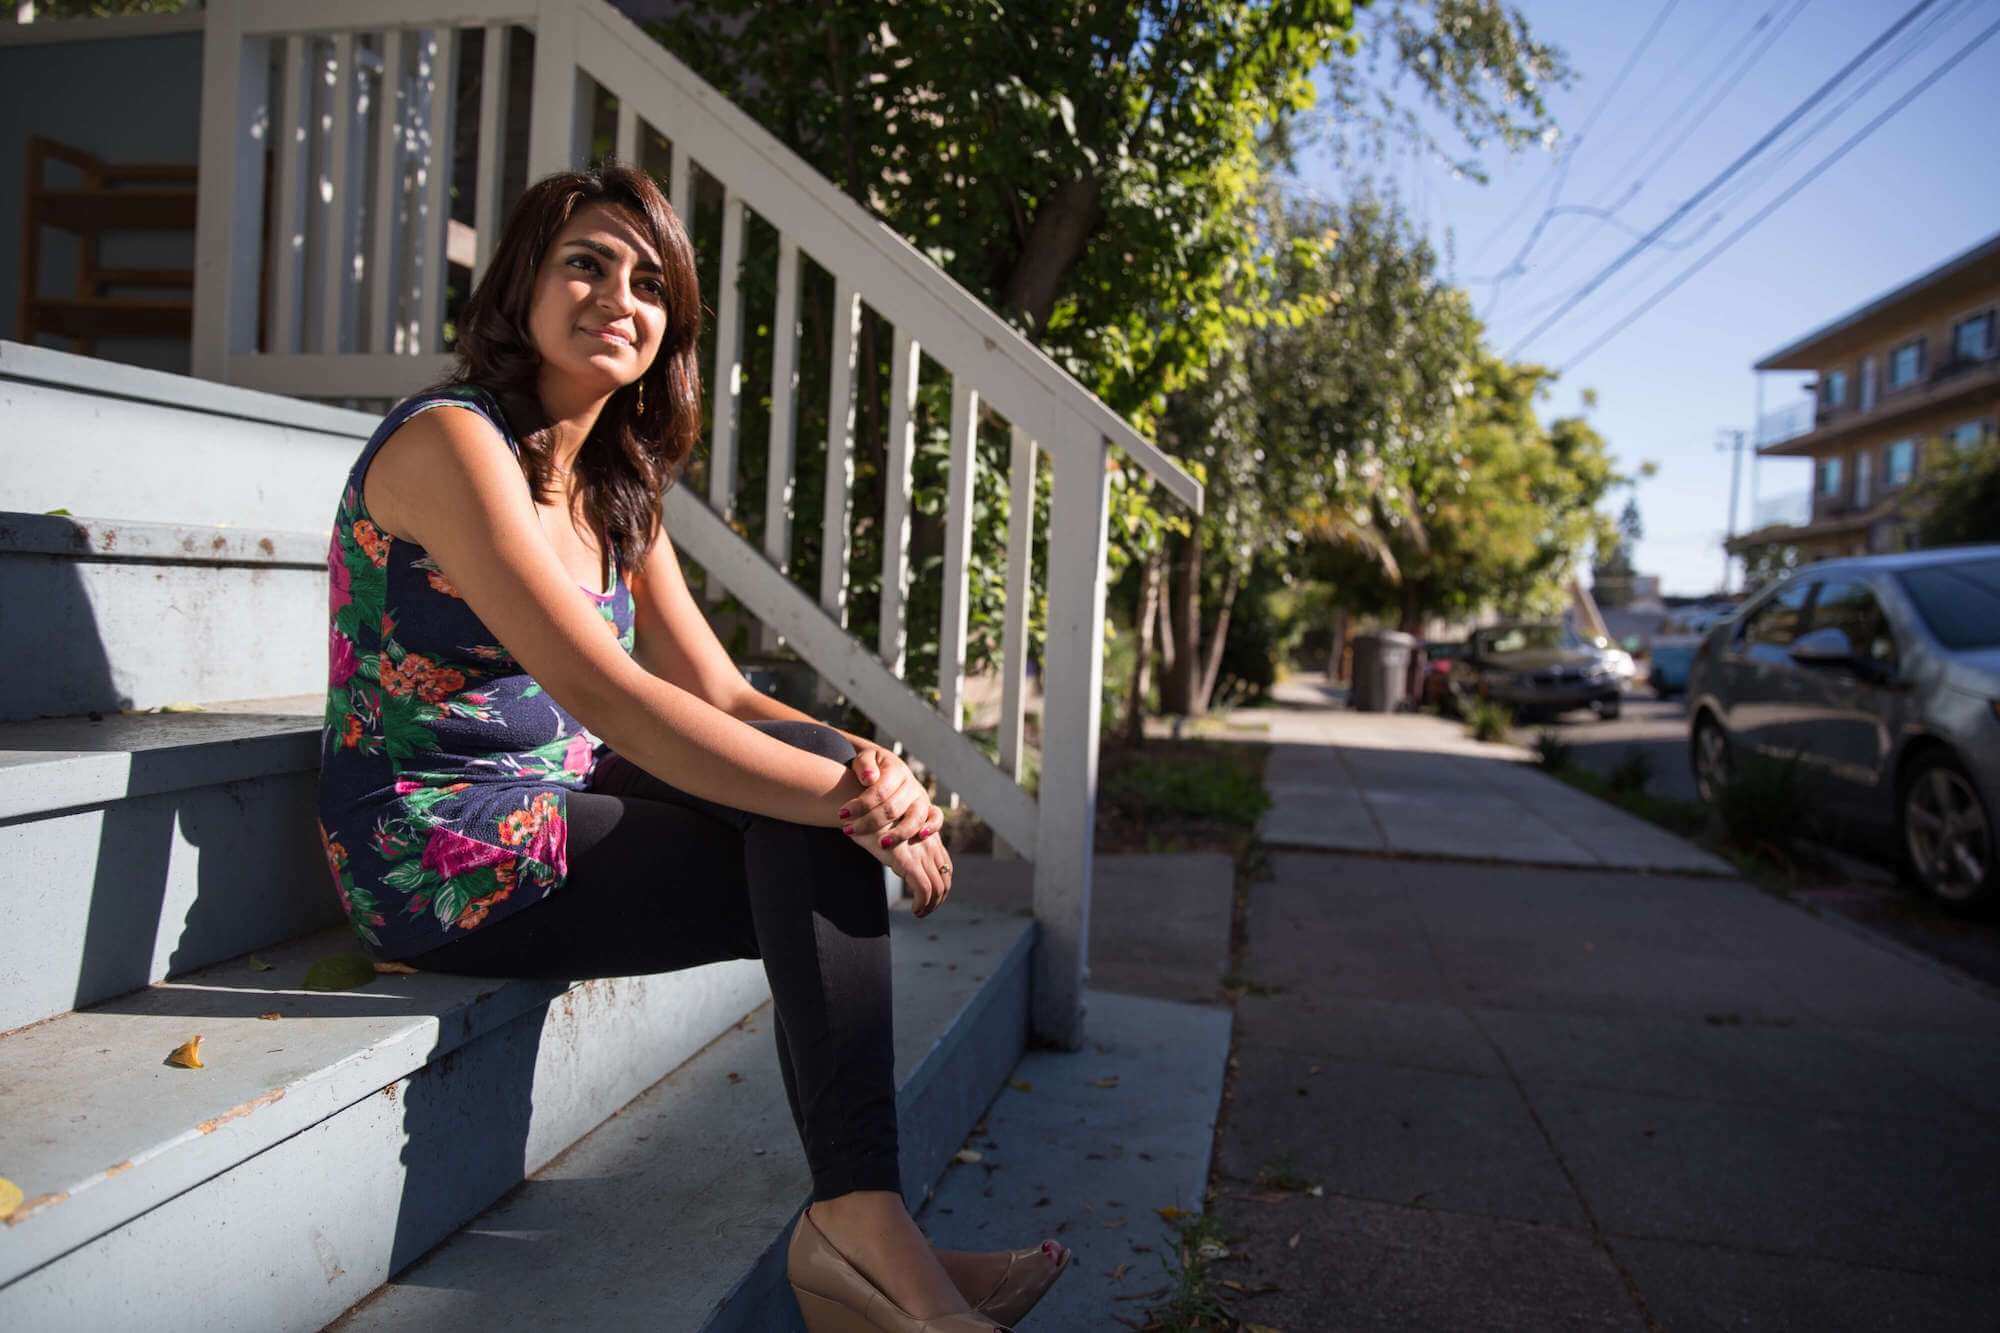 Smiling woman sitting on steps in front of her home